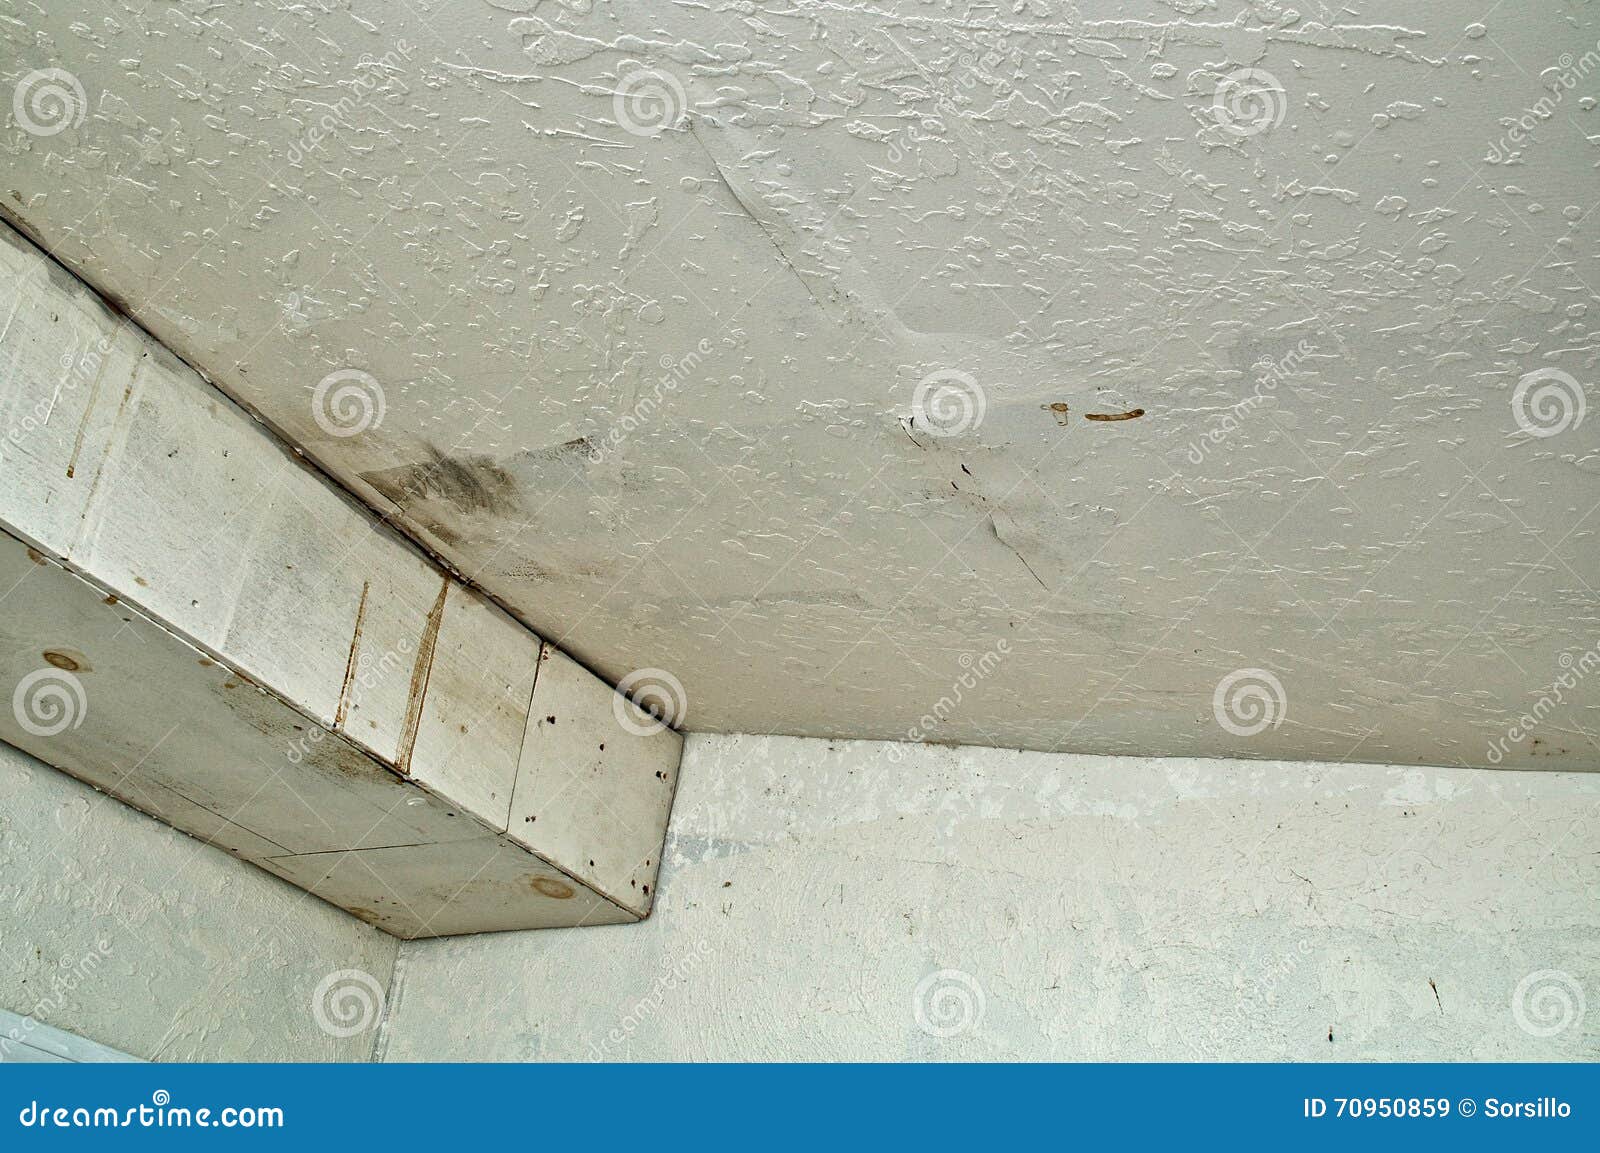 Ceiling Damage From Rain Water Leak Stock Image Image Of